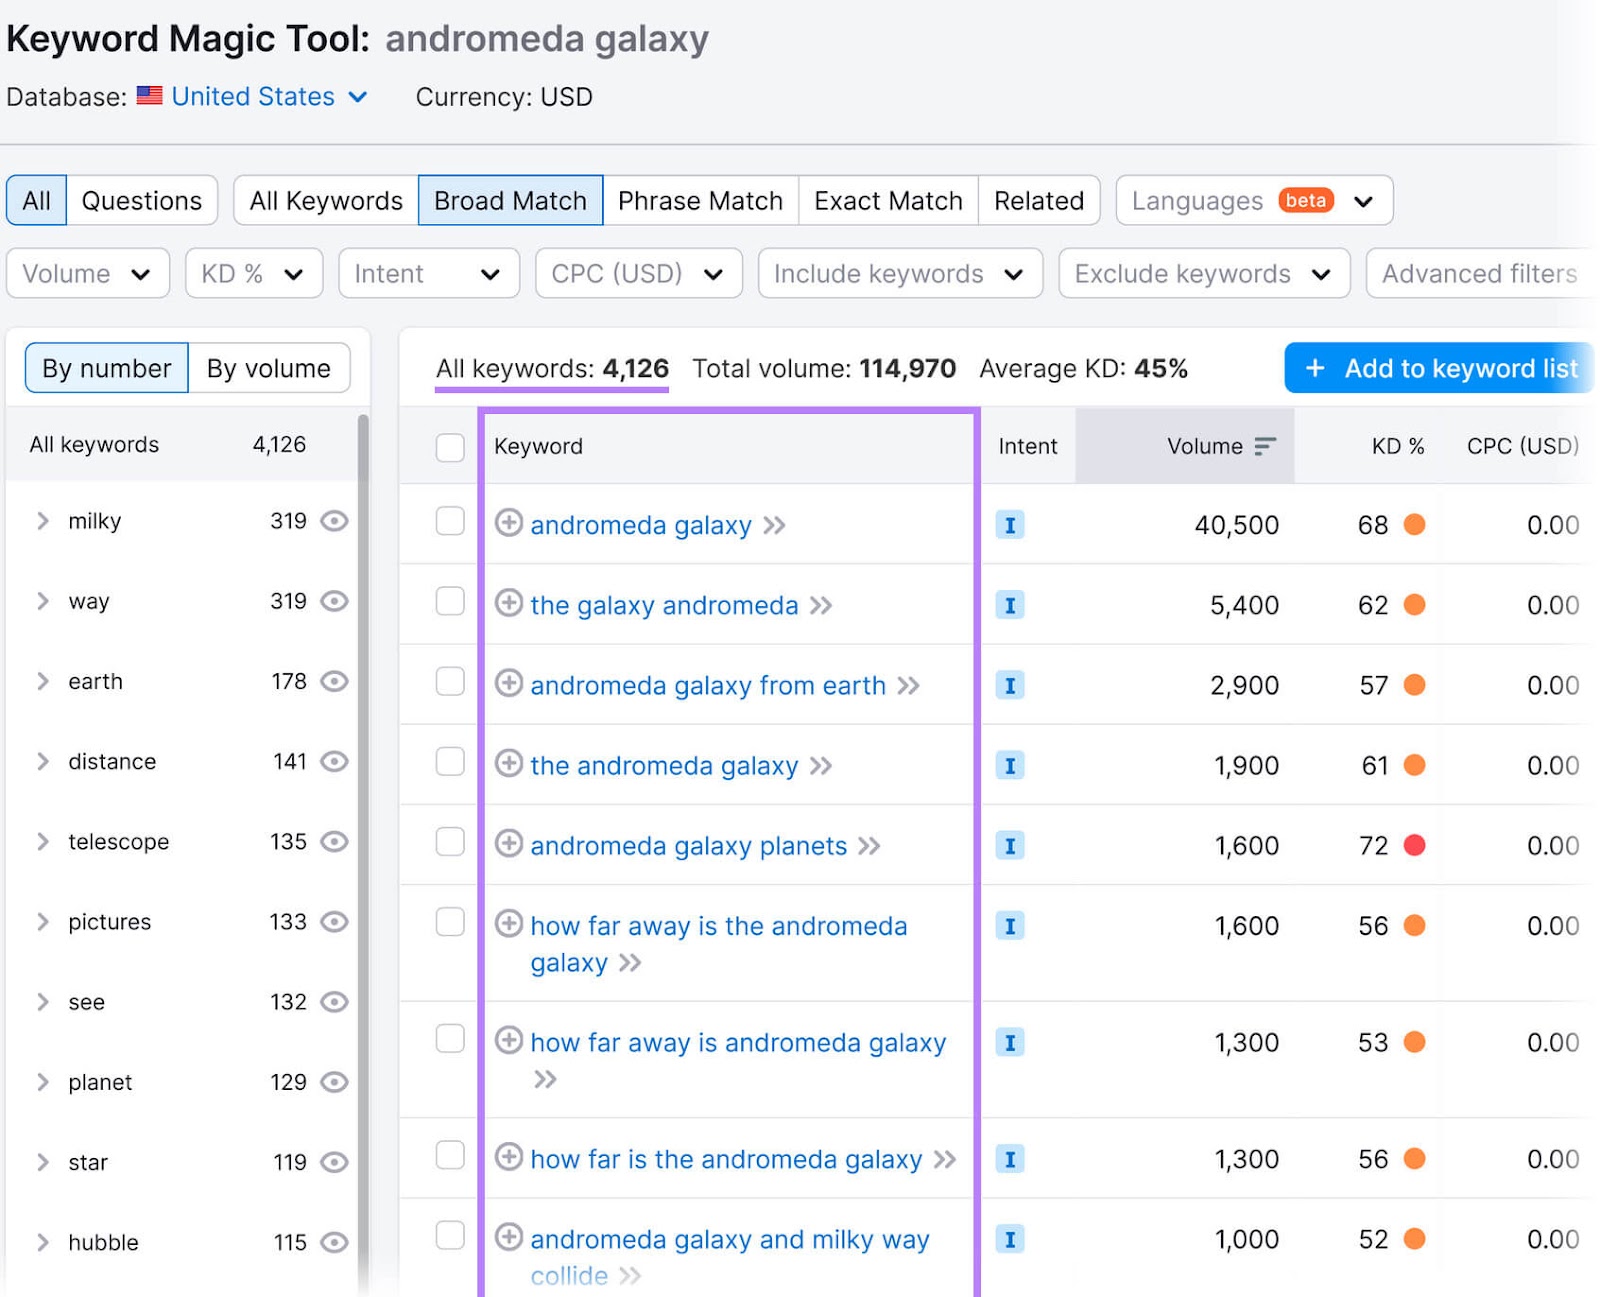 Keyword Magic Tool results showing on the right a table of specific keyword phrases, their search intent, volume, etc.